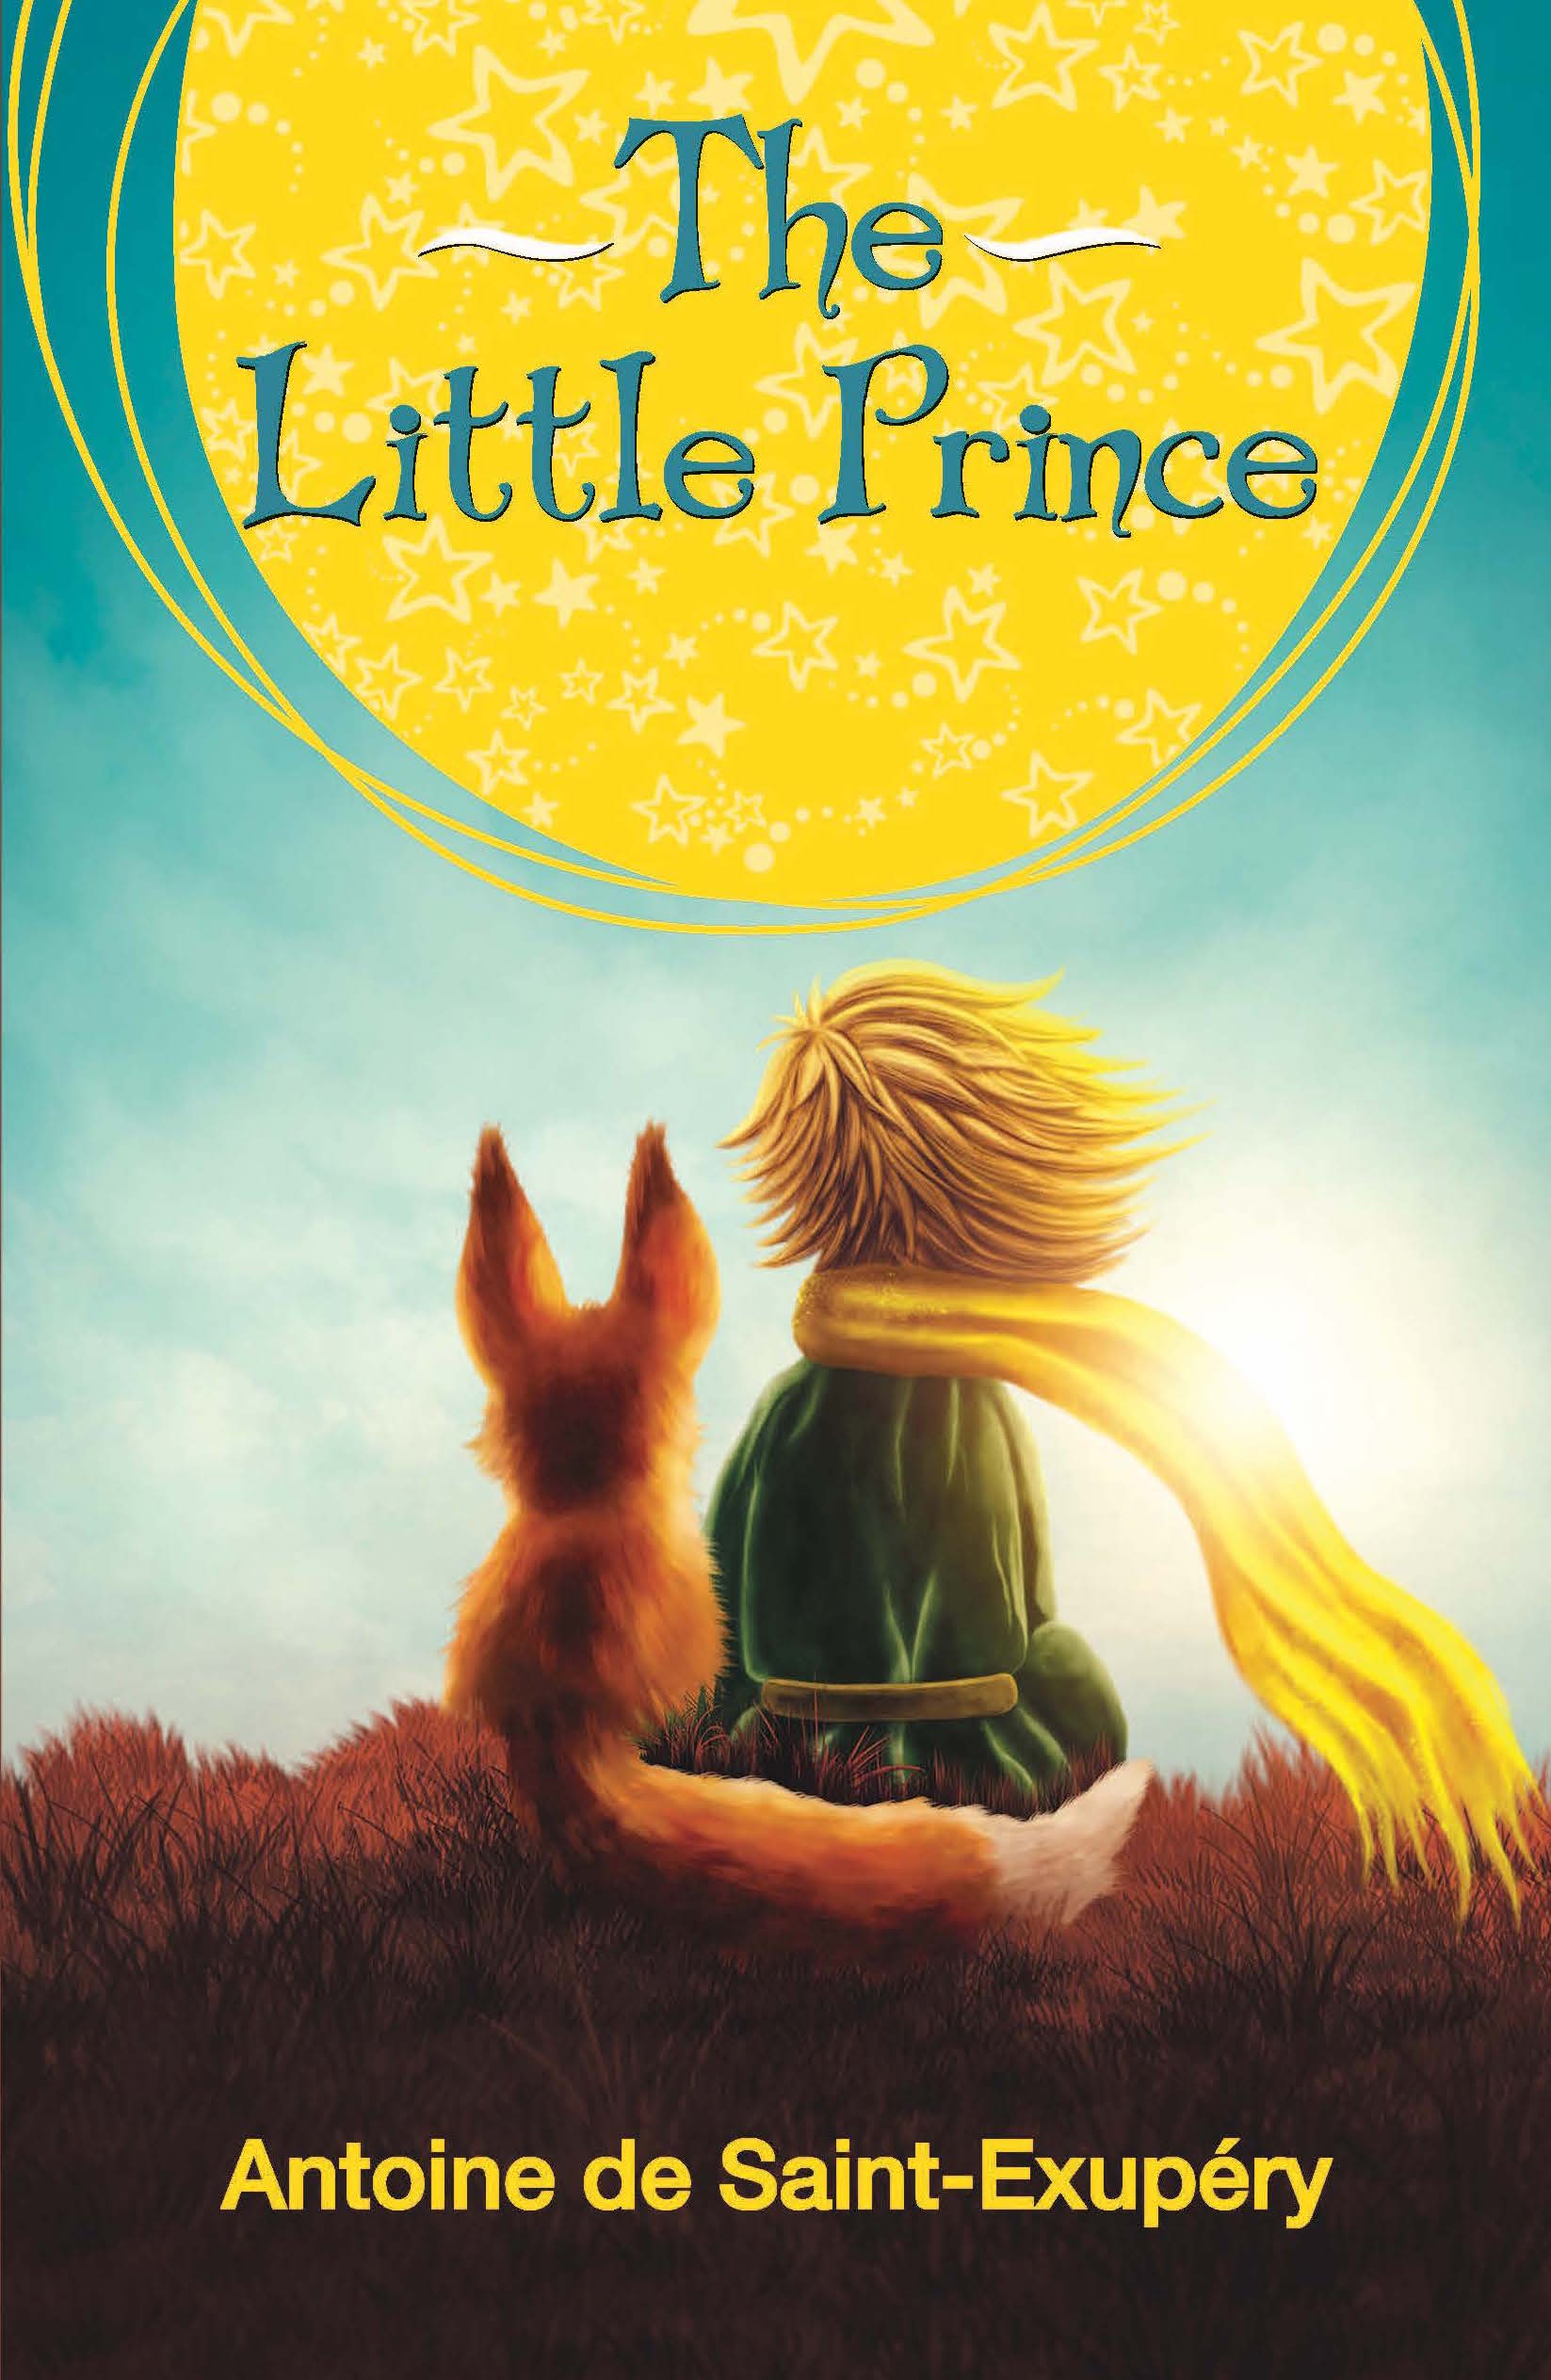 The Little Prince:An all-time classic